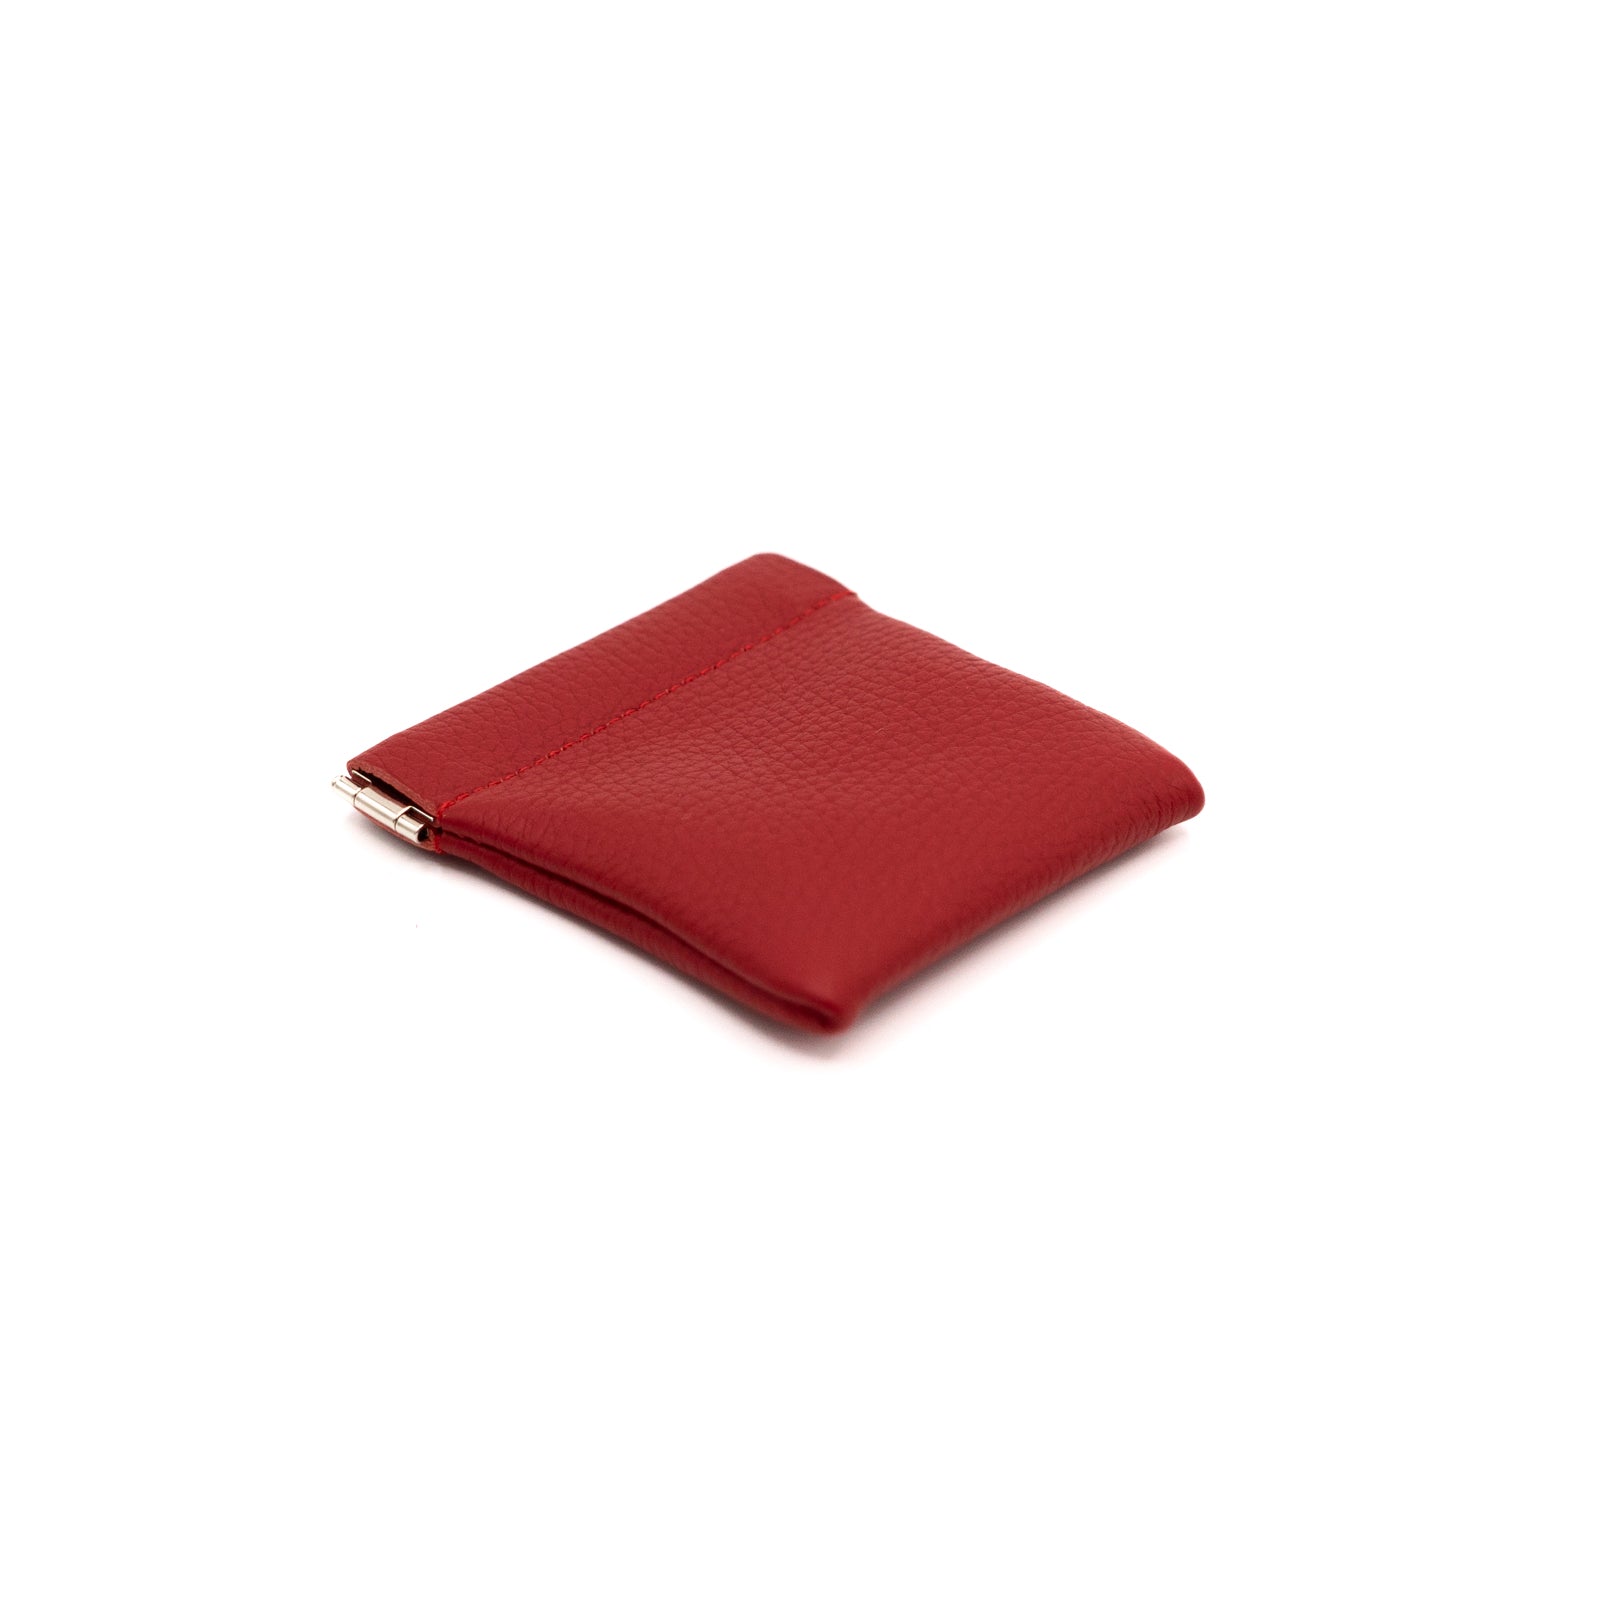 [Service item] Square spring mouth pouch S / Cuir Marsh